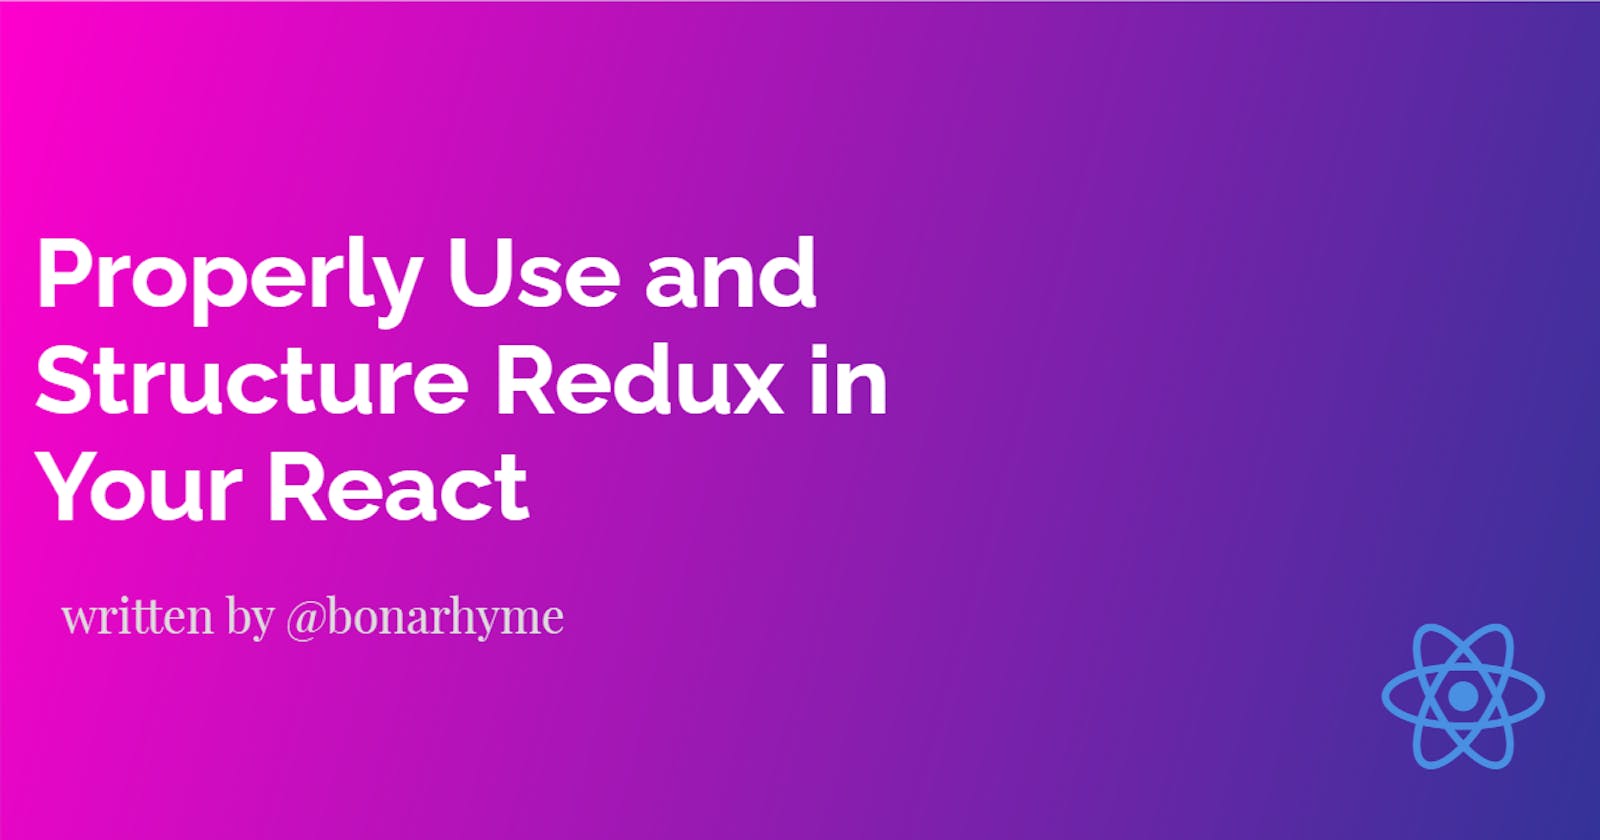 Guide on How to Properly Use and Structure Redux in Your React App with an Example